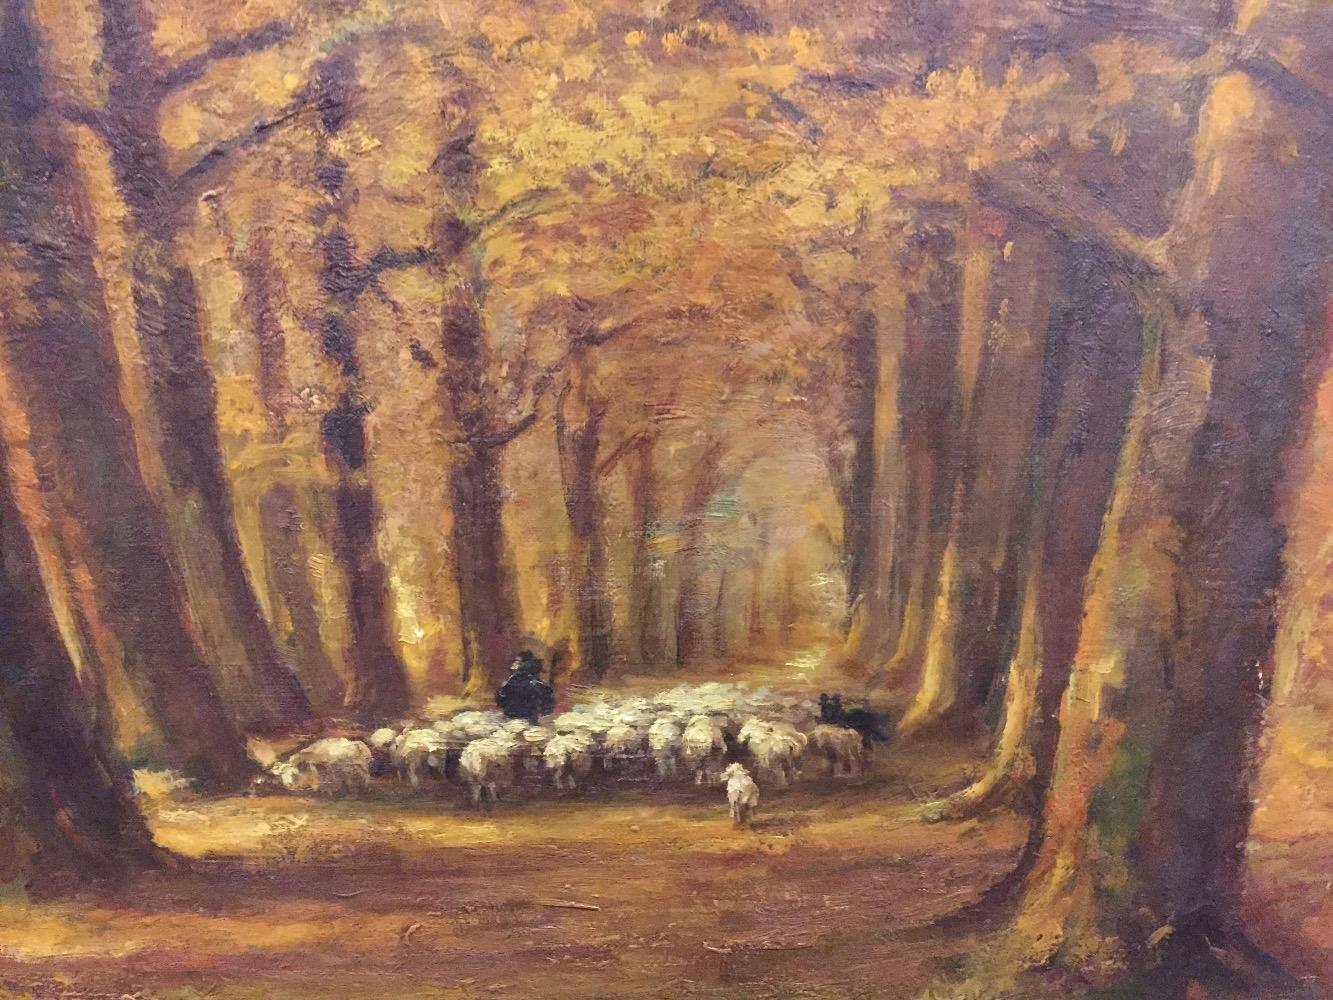 Shepherd with sheep in the forest 